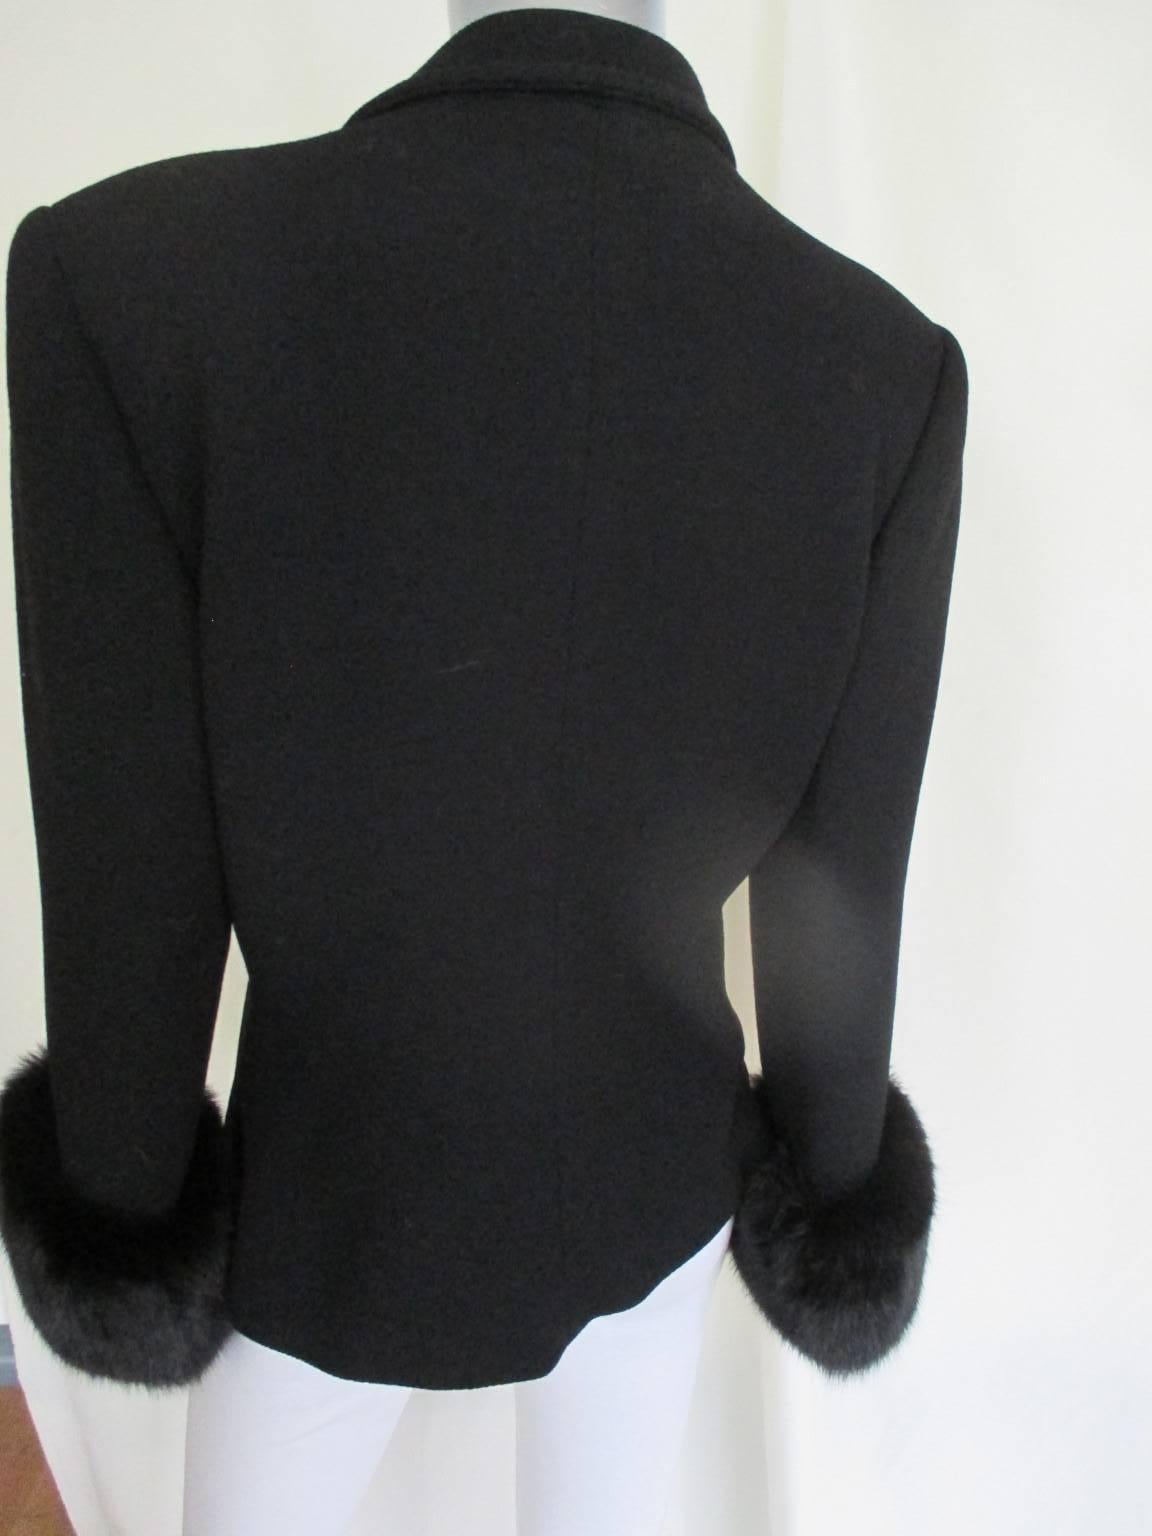 This unique piece Gai Couture Mattiolo is made of wool and trimmed with fox fur
100% wool
1 pocket
2 silver color buttons
Its in good vintage condition.
Size mentioned Italian 46 but can be fitted US 10/12 or EU 40